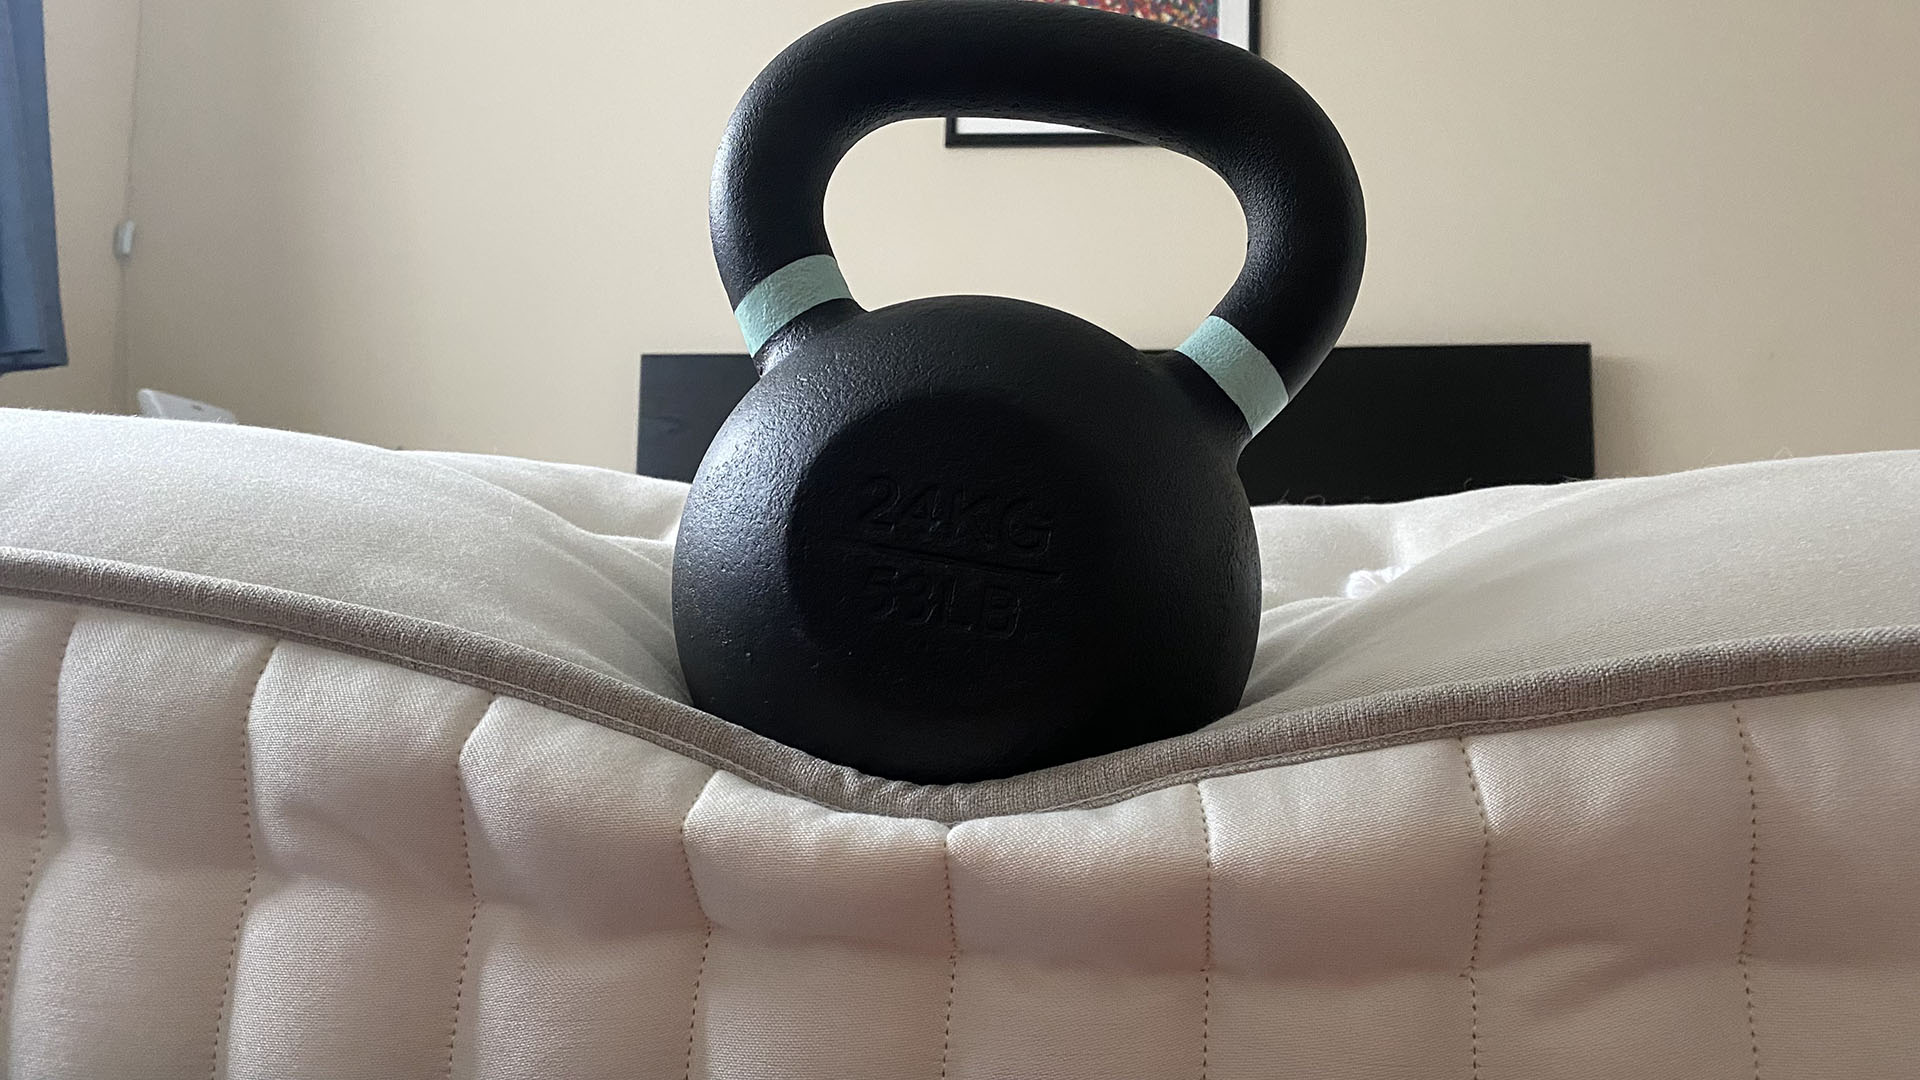 A 24kg kettlebell balanced on the bottom edge of the Simba Earth Escape mattress, demonstrating the edge support